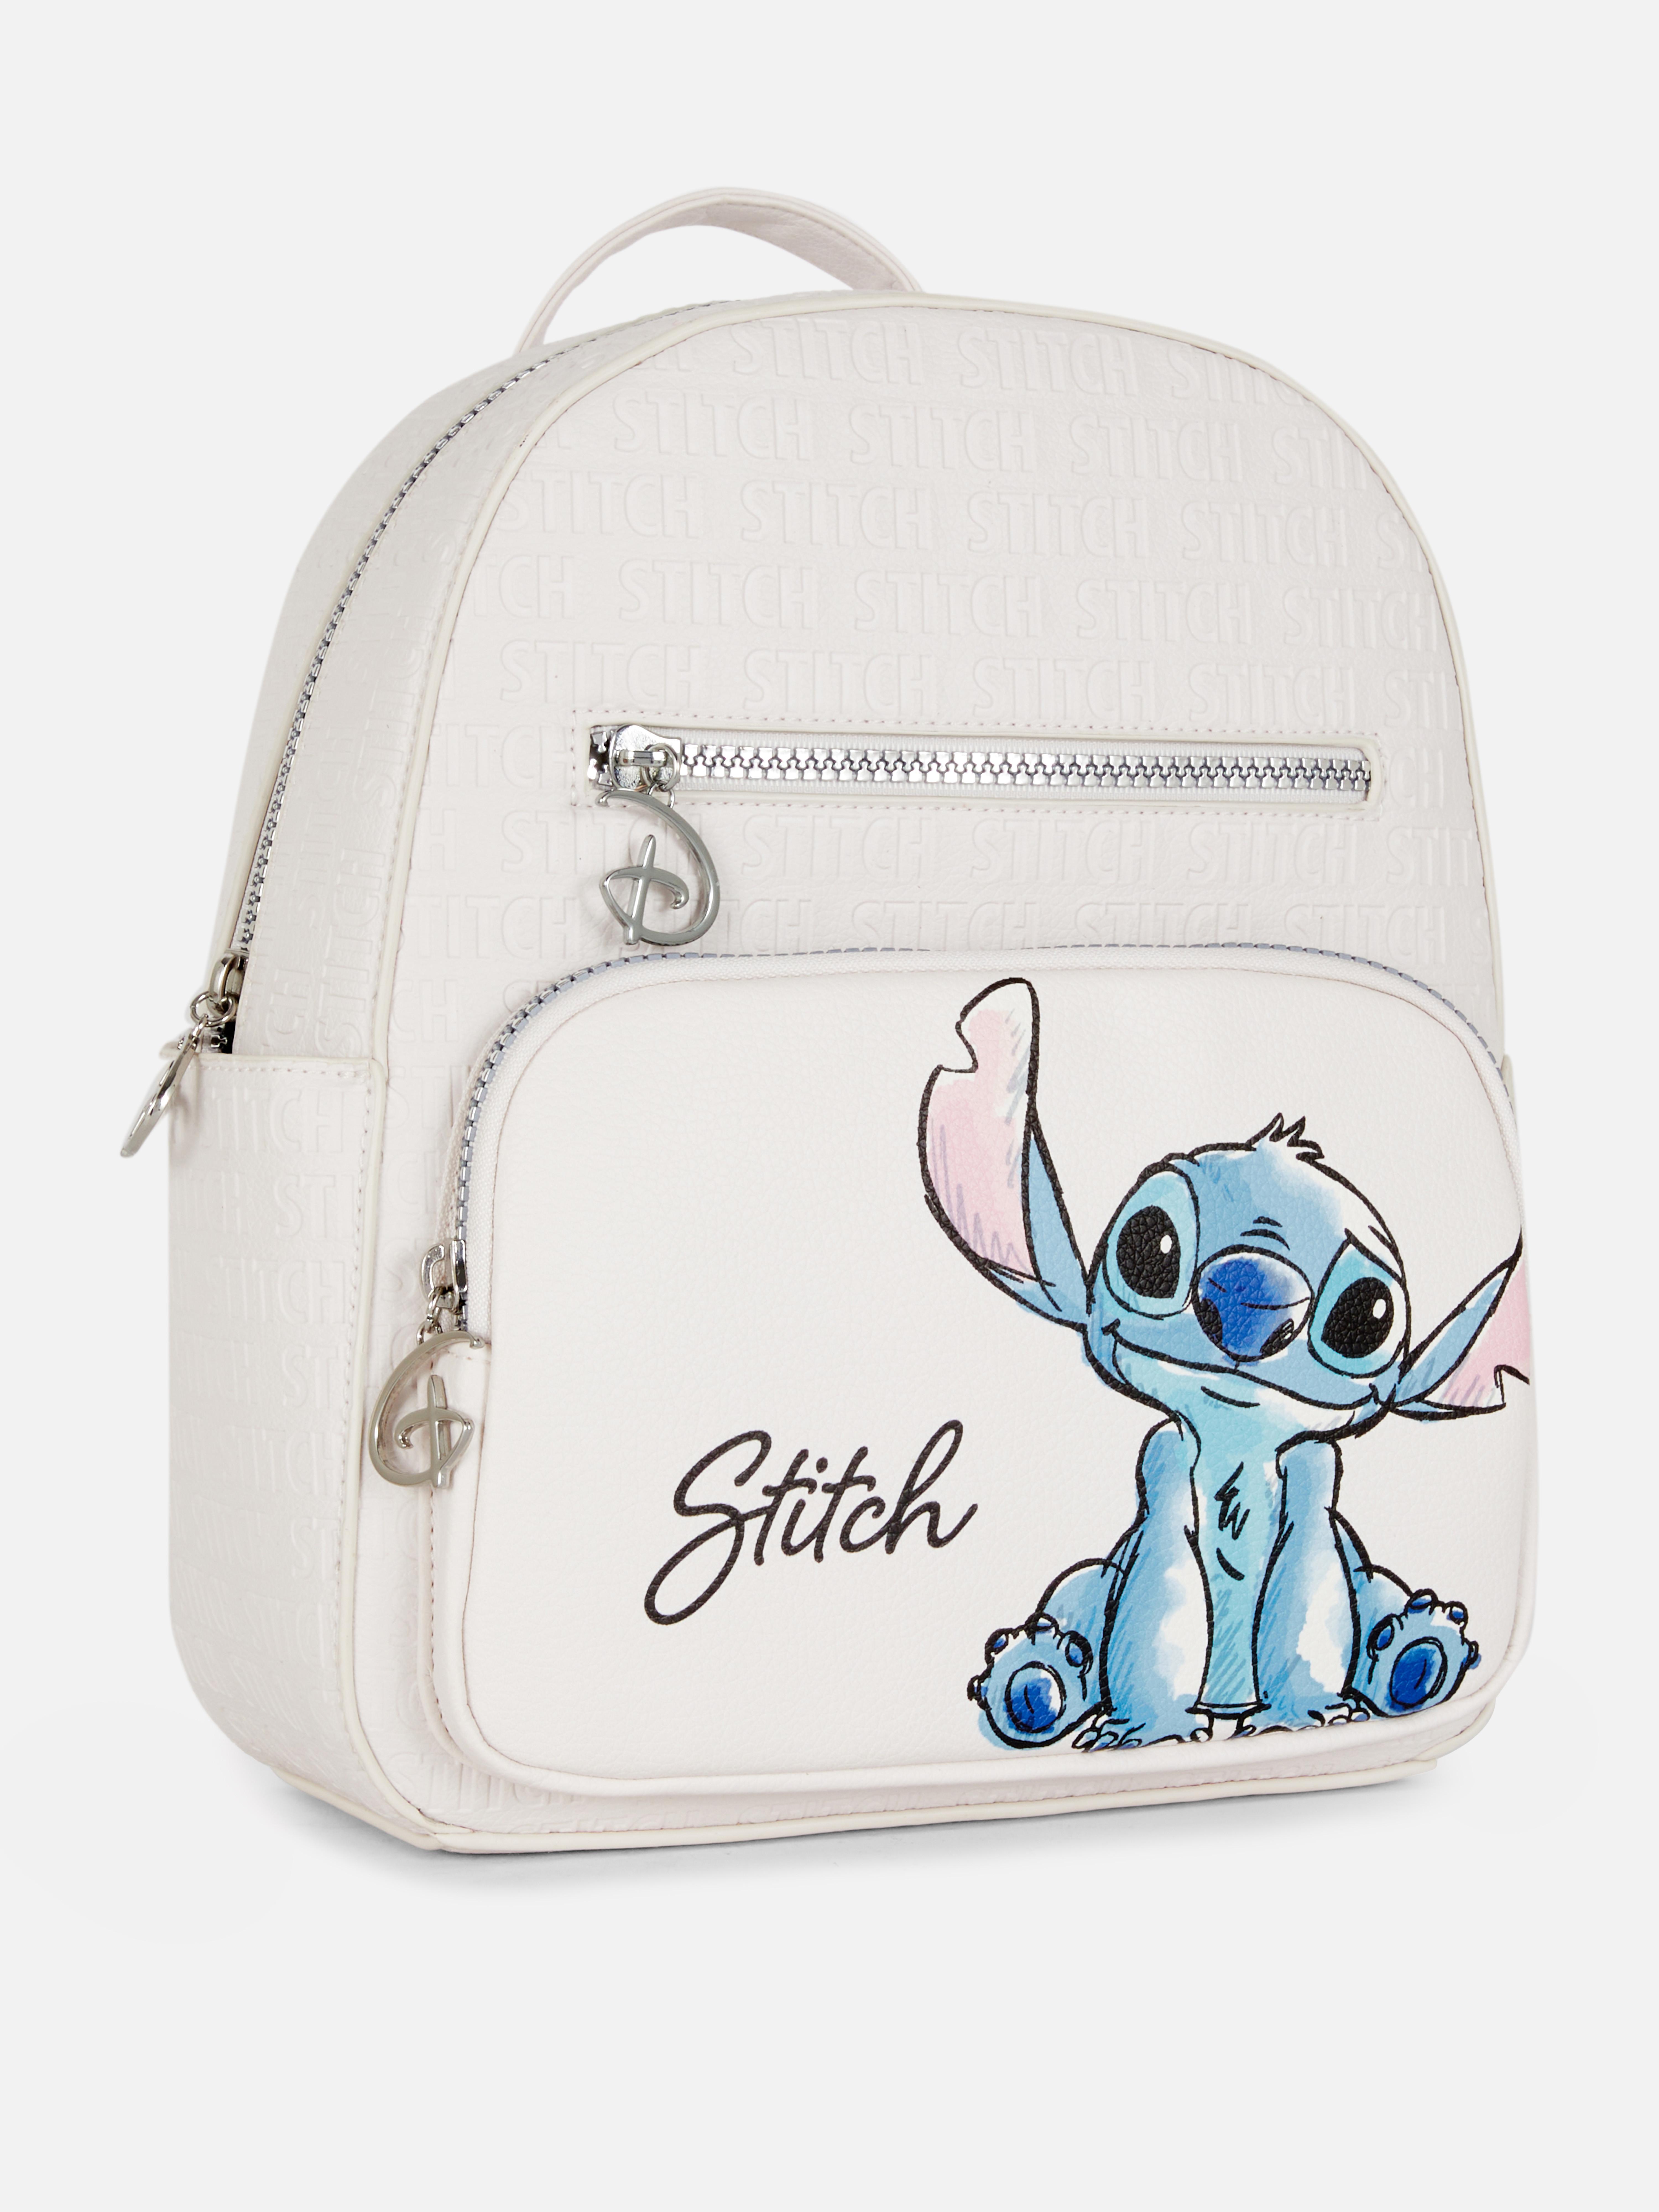 PRIMARK Disney's Lilo & Stitch Backpack Faux Leather Brand New Womens Girls